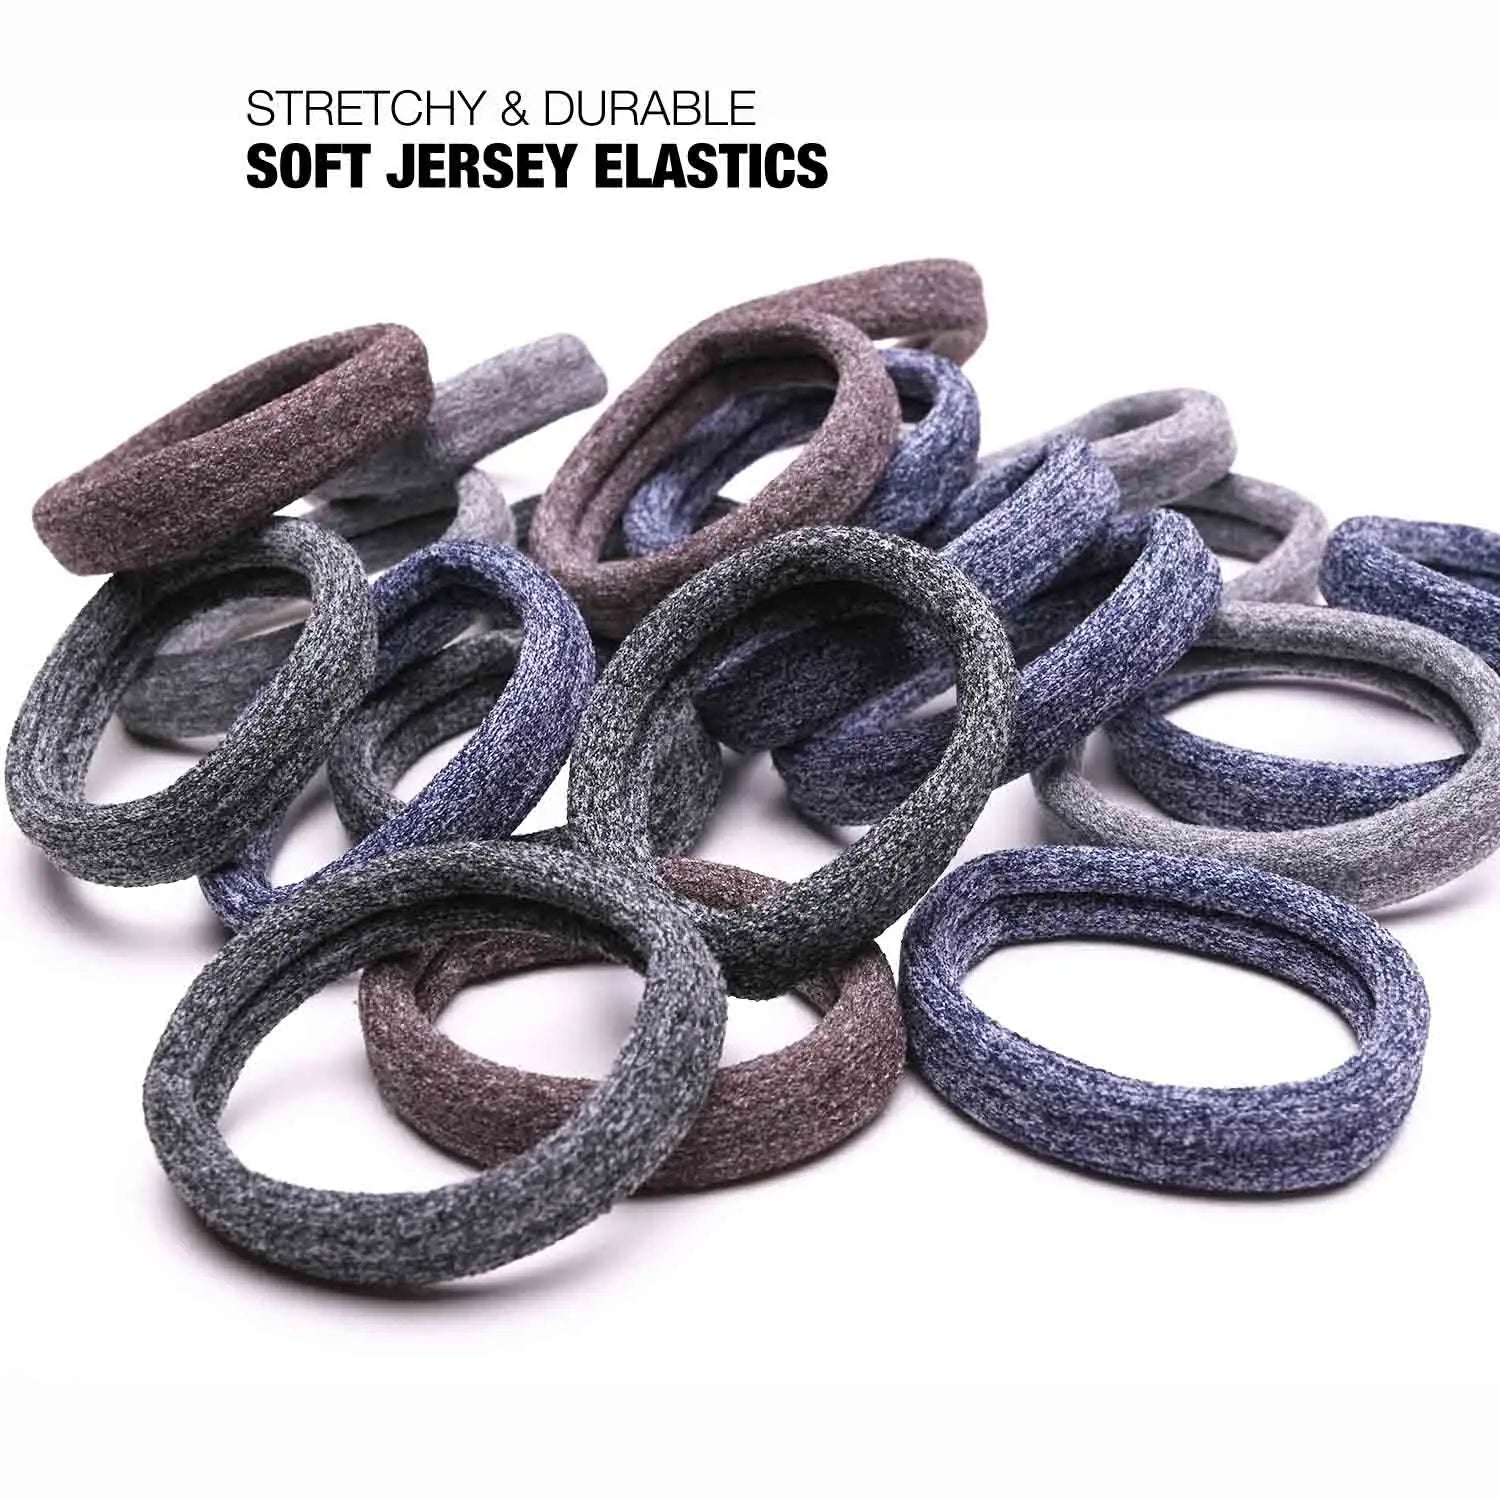 Multi-colored jersey marl sports hair elastics from Active Hair Ties